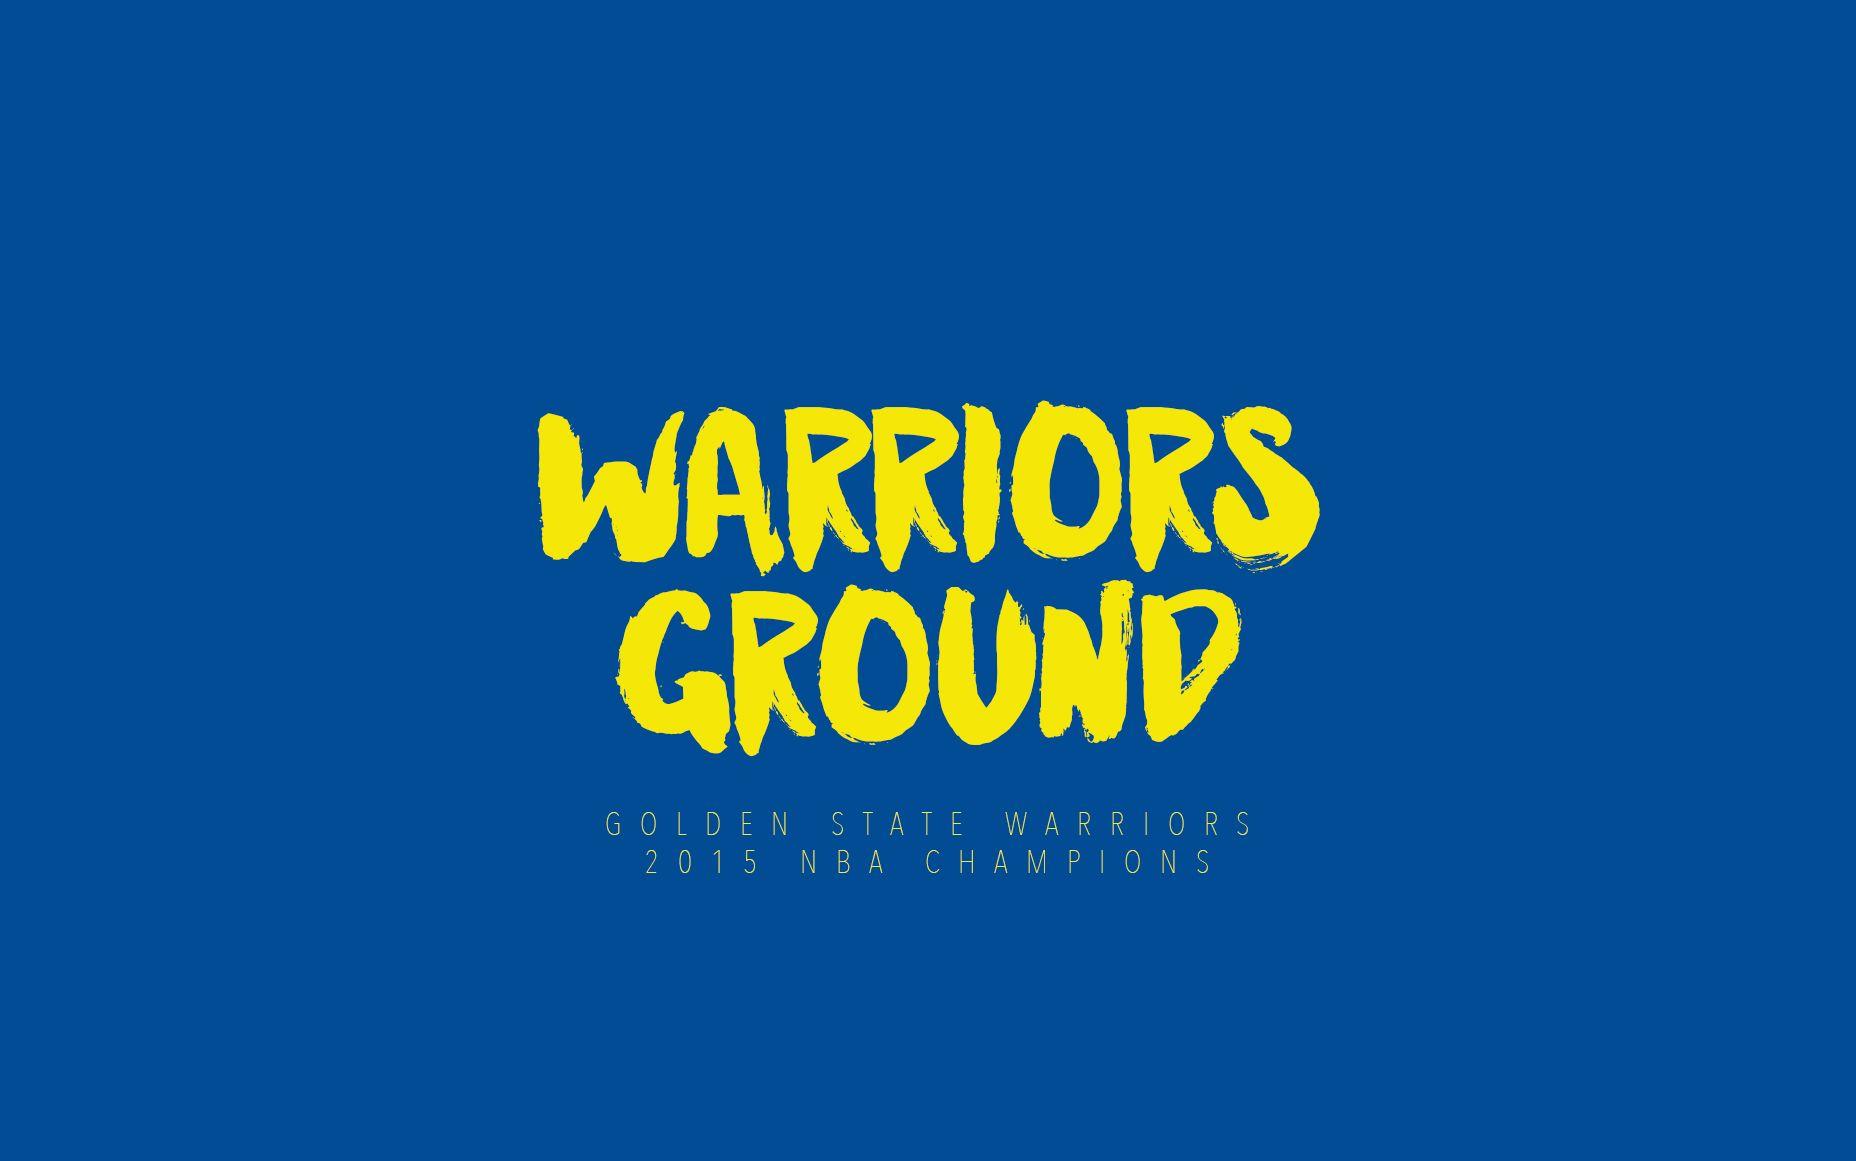 Golden State Warriors Wallpaper Collection For Free Download. HD